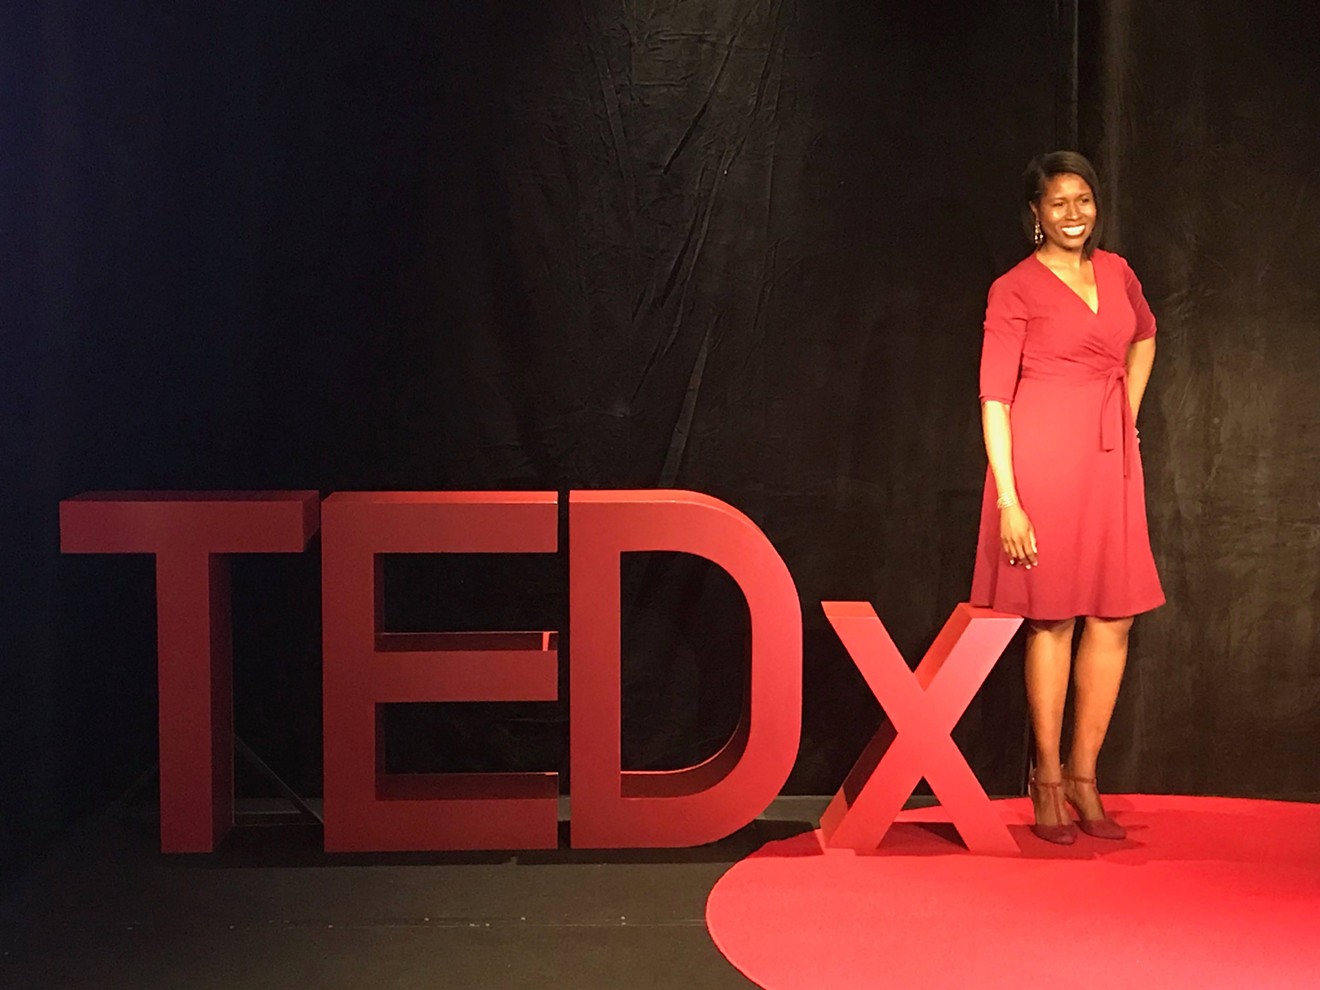 Victoria Baylor gives TEDx talk "You Are Who You Are Not What You Do"